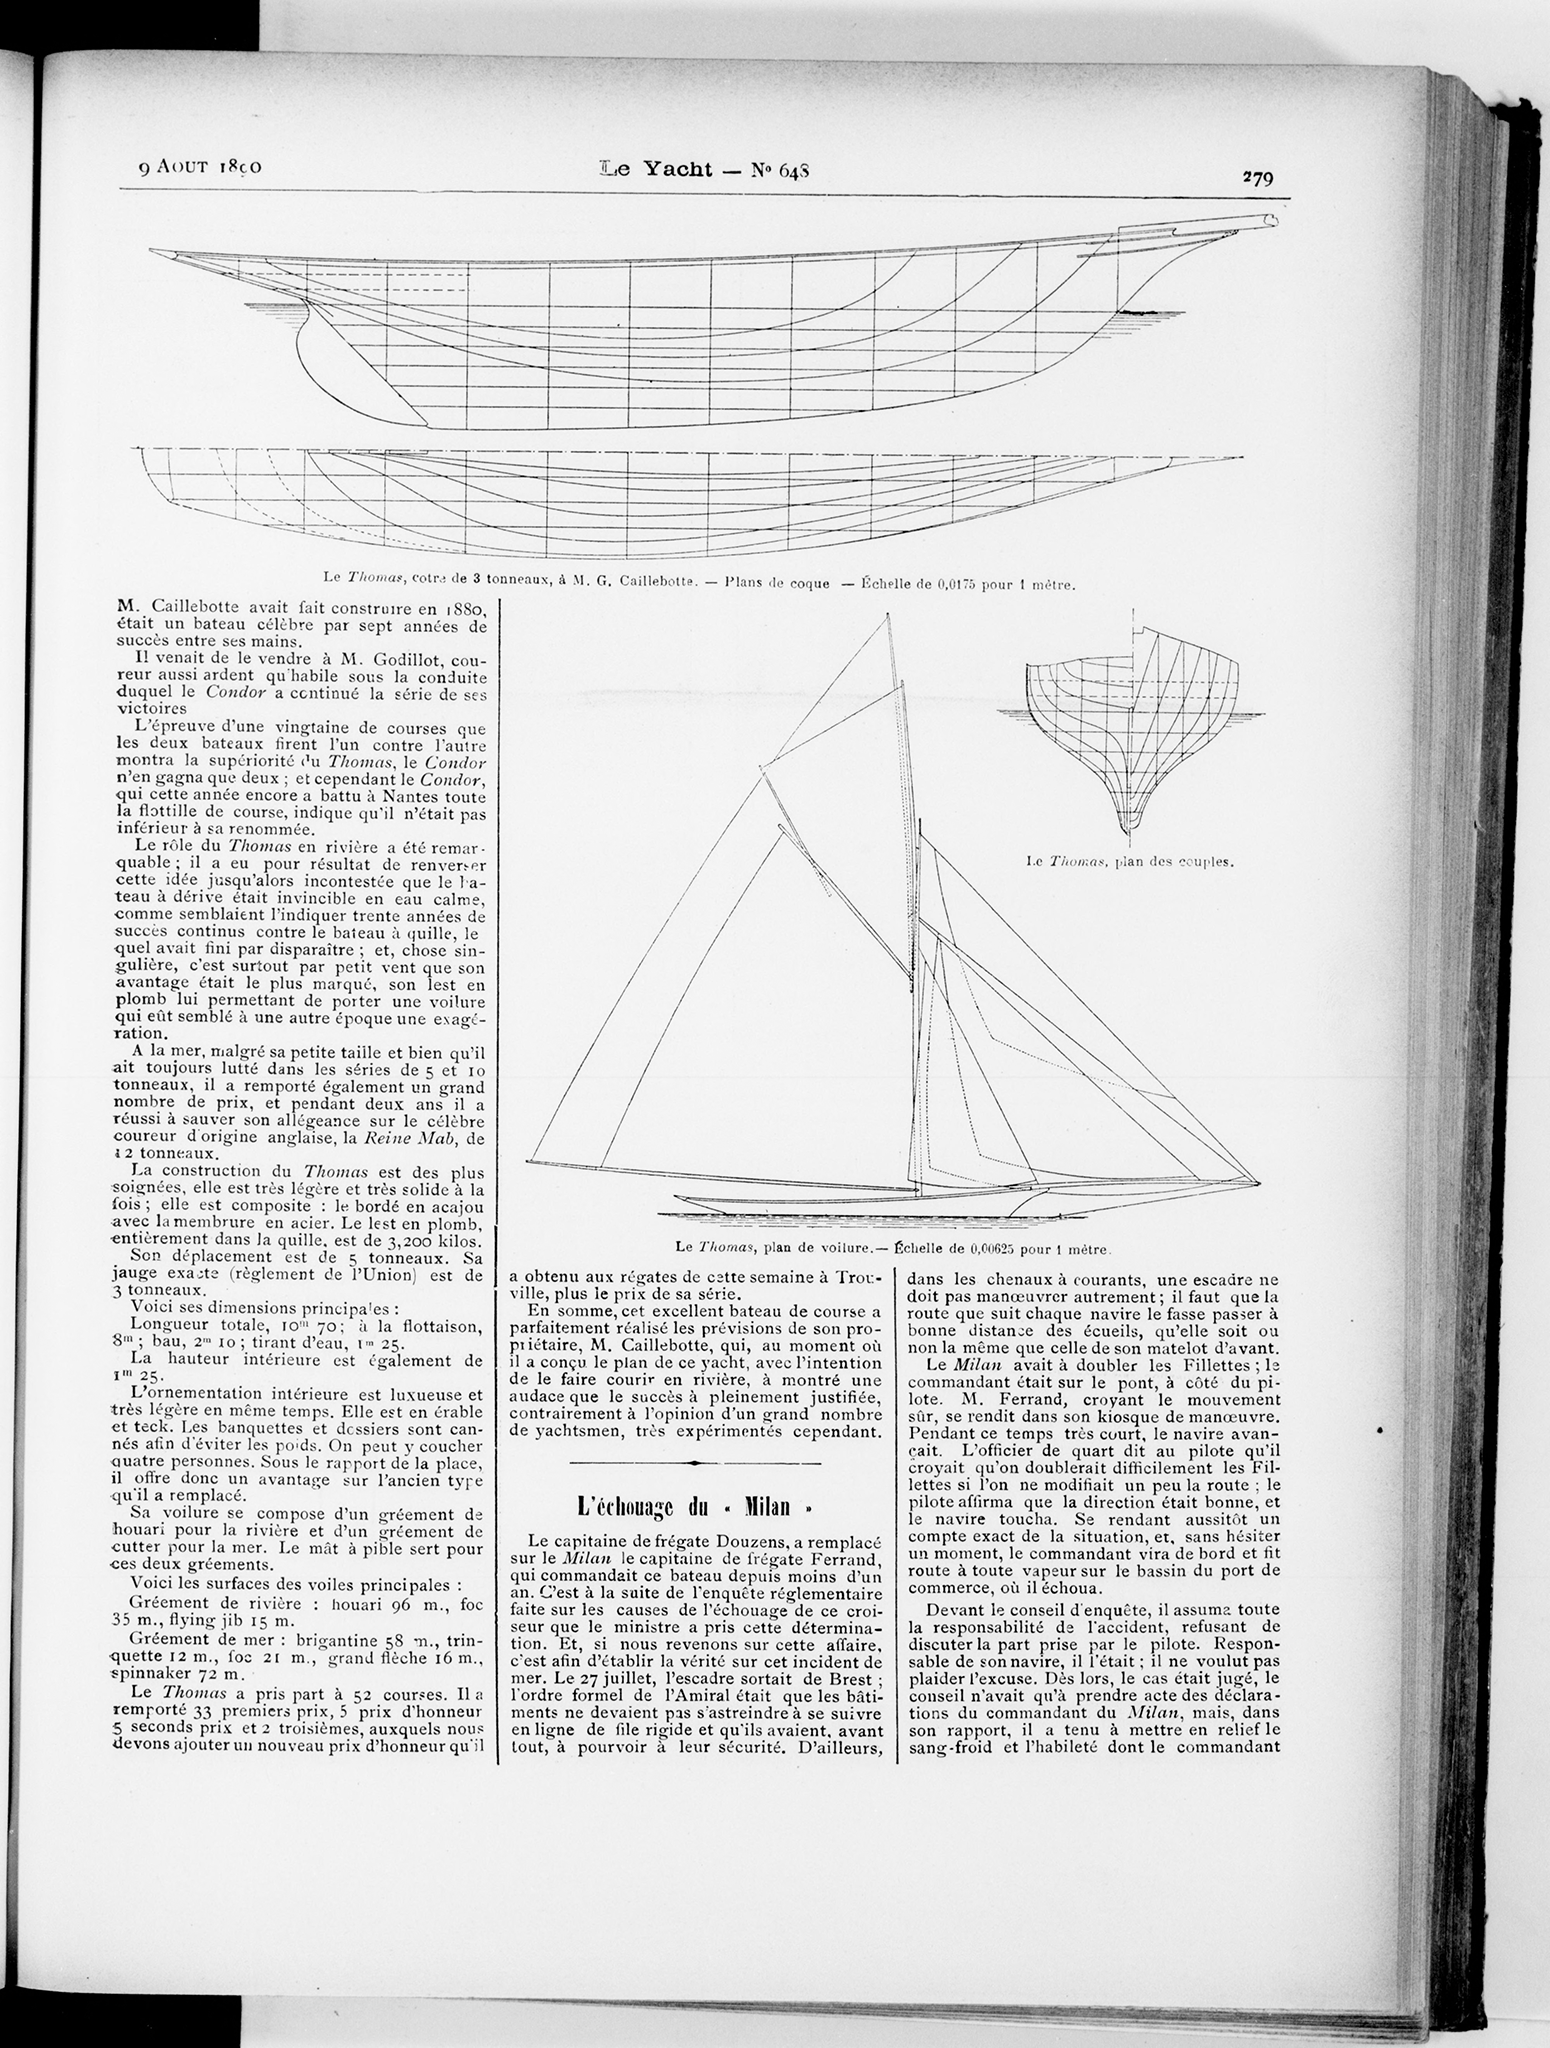 A photograph of a page that has the hull of a sailboat at the top of the page. Under it, is the side view of a sailboat.